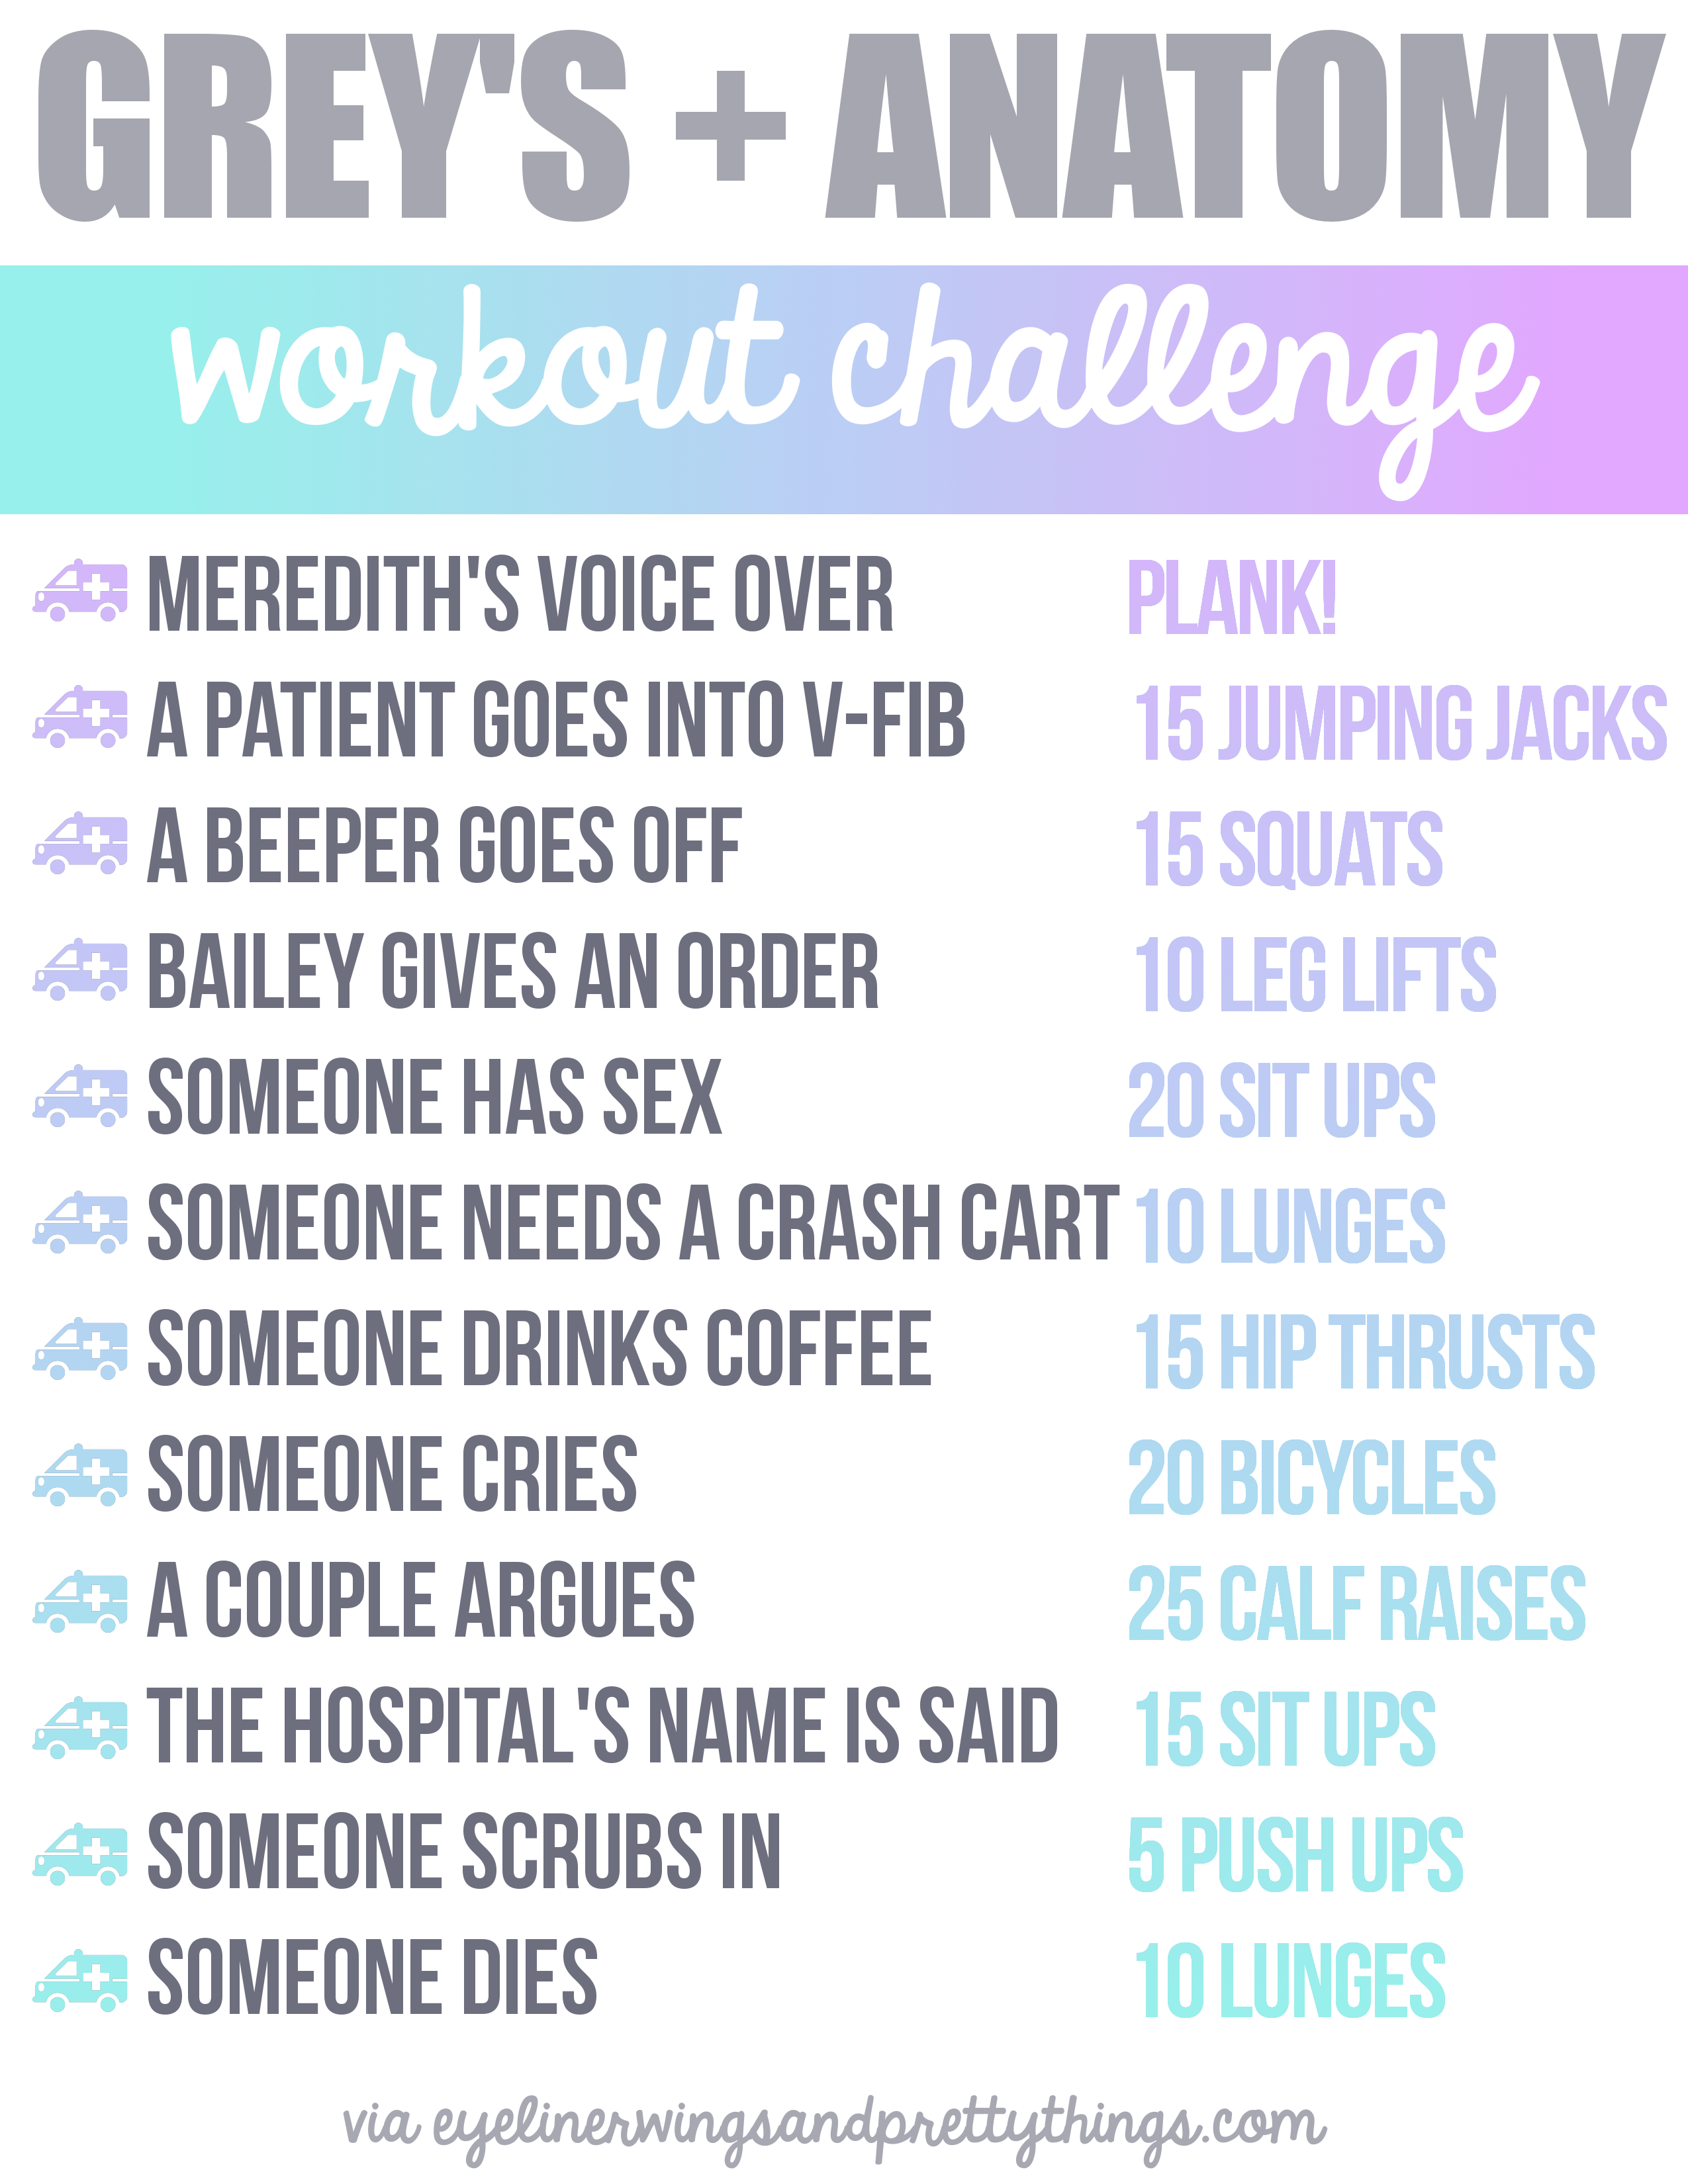 TV WORKOUTS - Grey's Anatomy Workout Challenge // eyeliner wings & pretty things